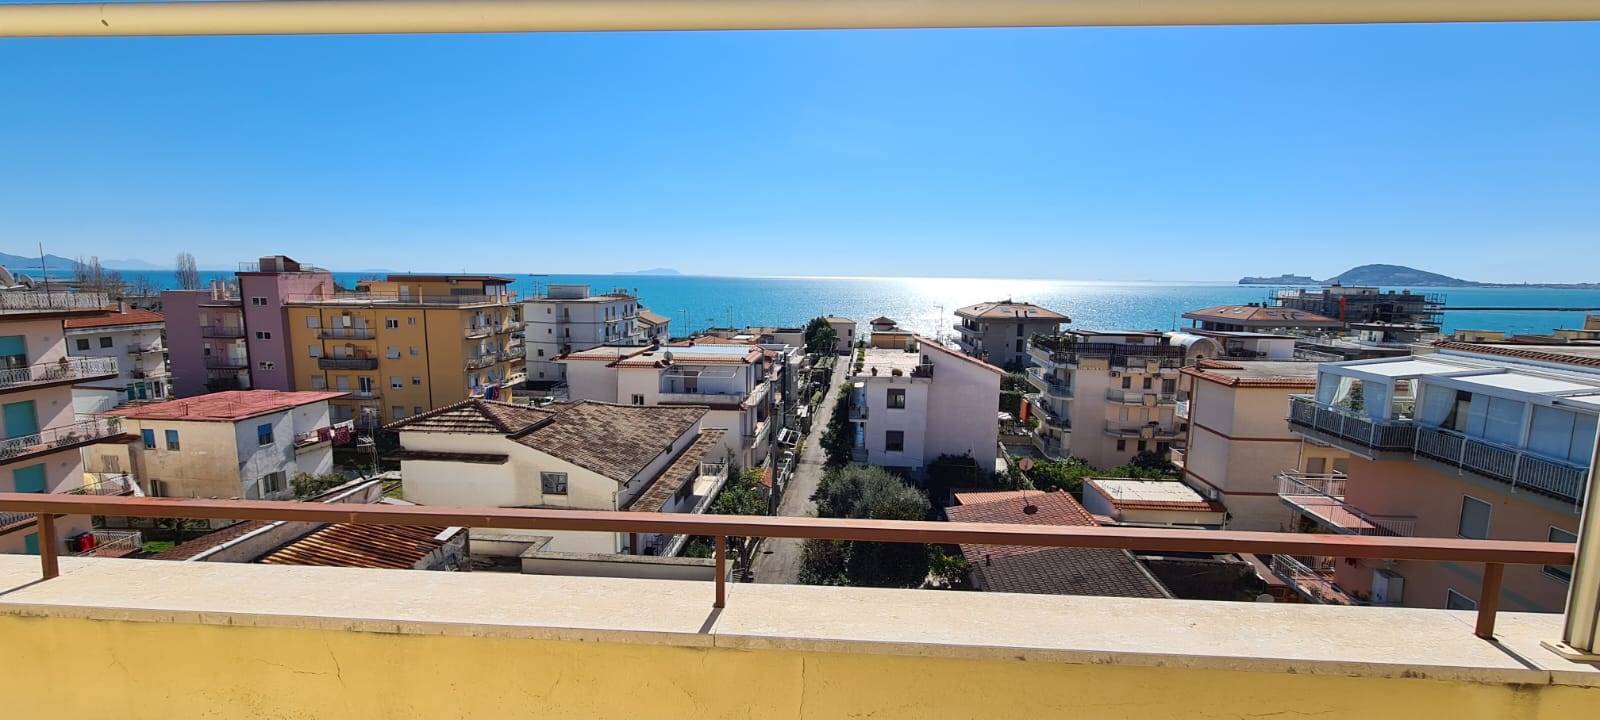 FORMIA, Apartment for sale of 110 Sq. mt., Be restored, Heating Individual heating system, Energetic class: G, placed at 4° on 4, composed by: 4 